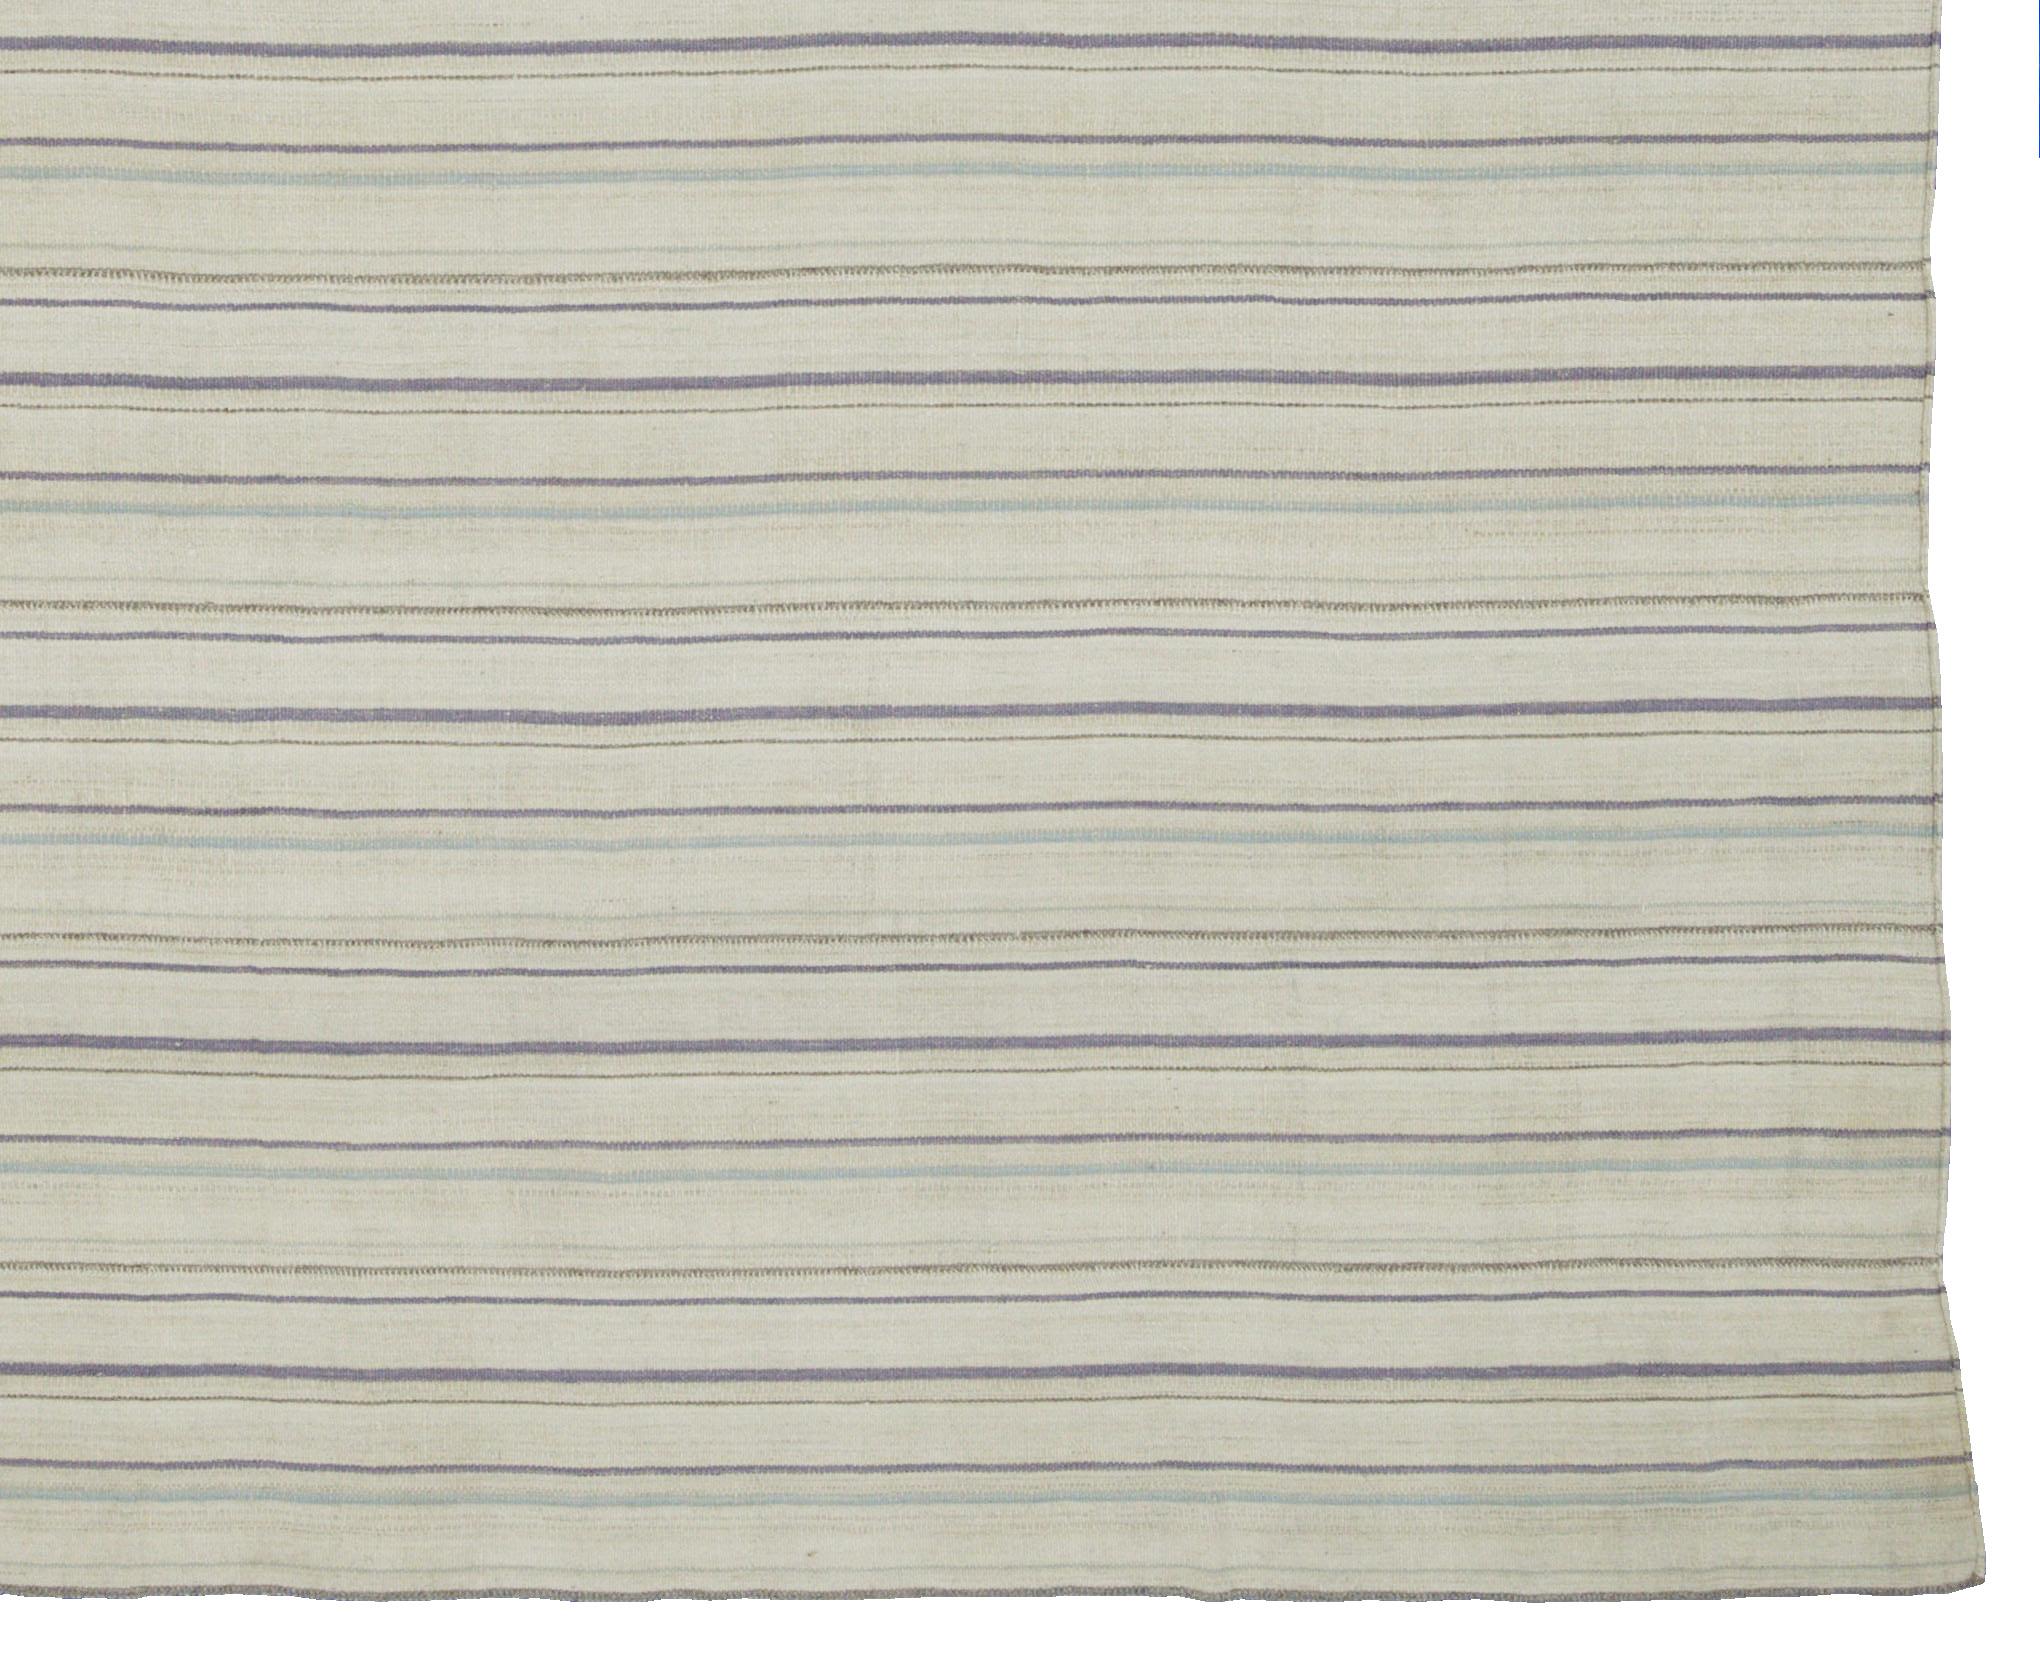 A new production Turkish rug handwoven from the finest sheep’s wool and colored with all-natural vegetable dyes that are safe for humans and pets. It’s a traditional Kilim flat-weave design featuring a lovely ivory field with gray, blue and purple